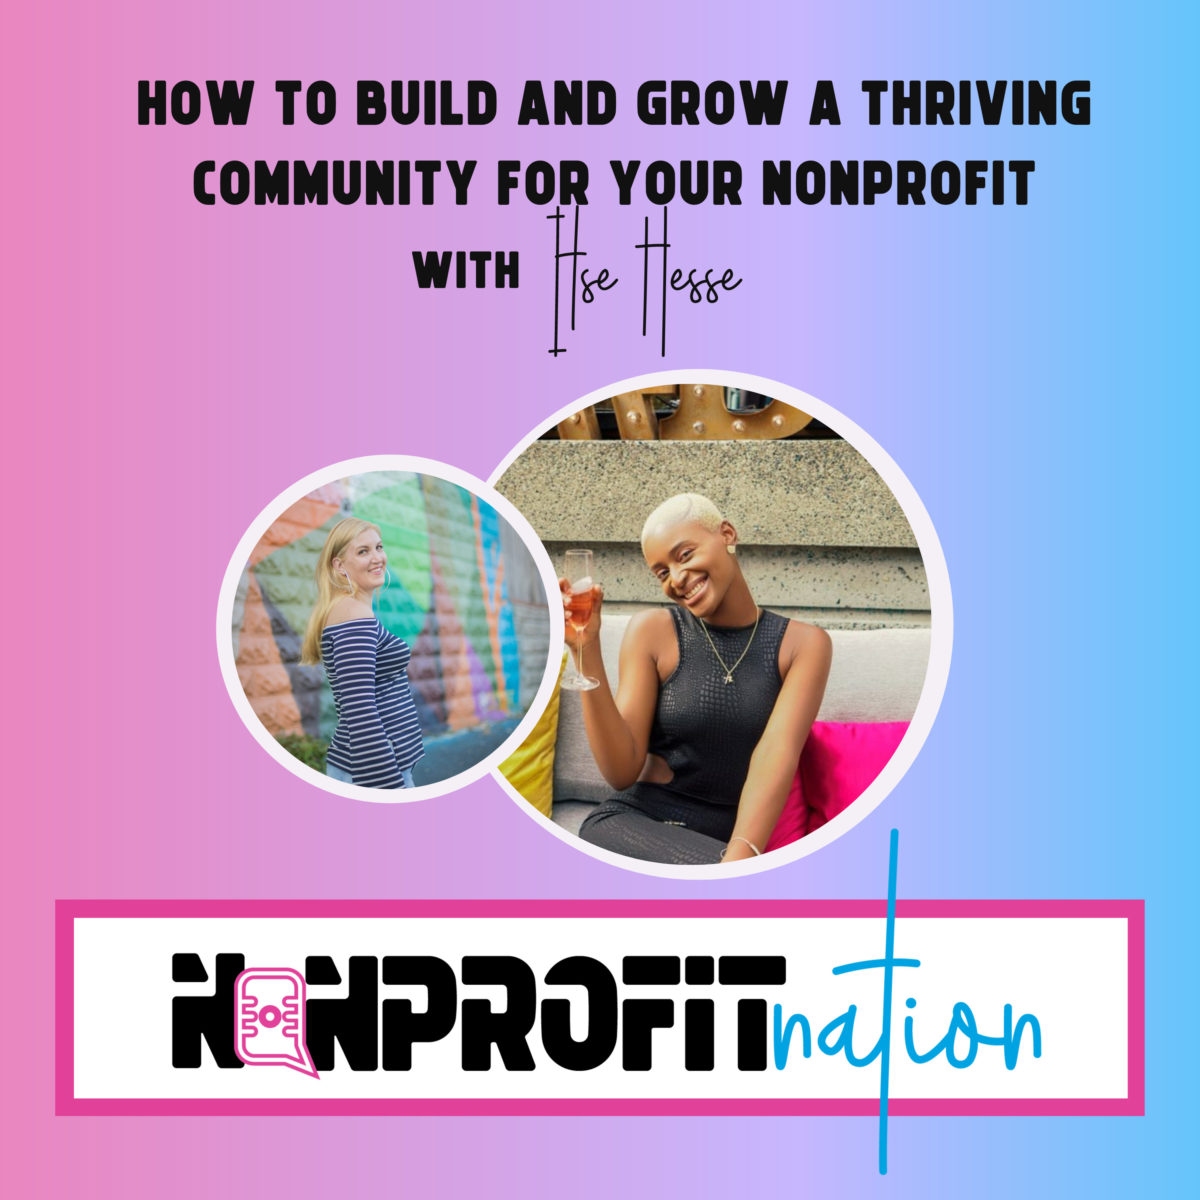 How to Build and Grow a Thriving Community for Your Nonprofit with Itse Hesse